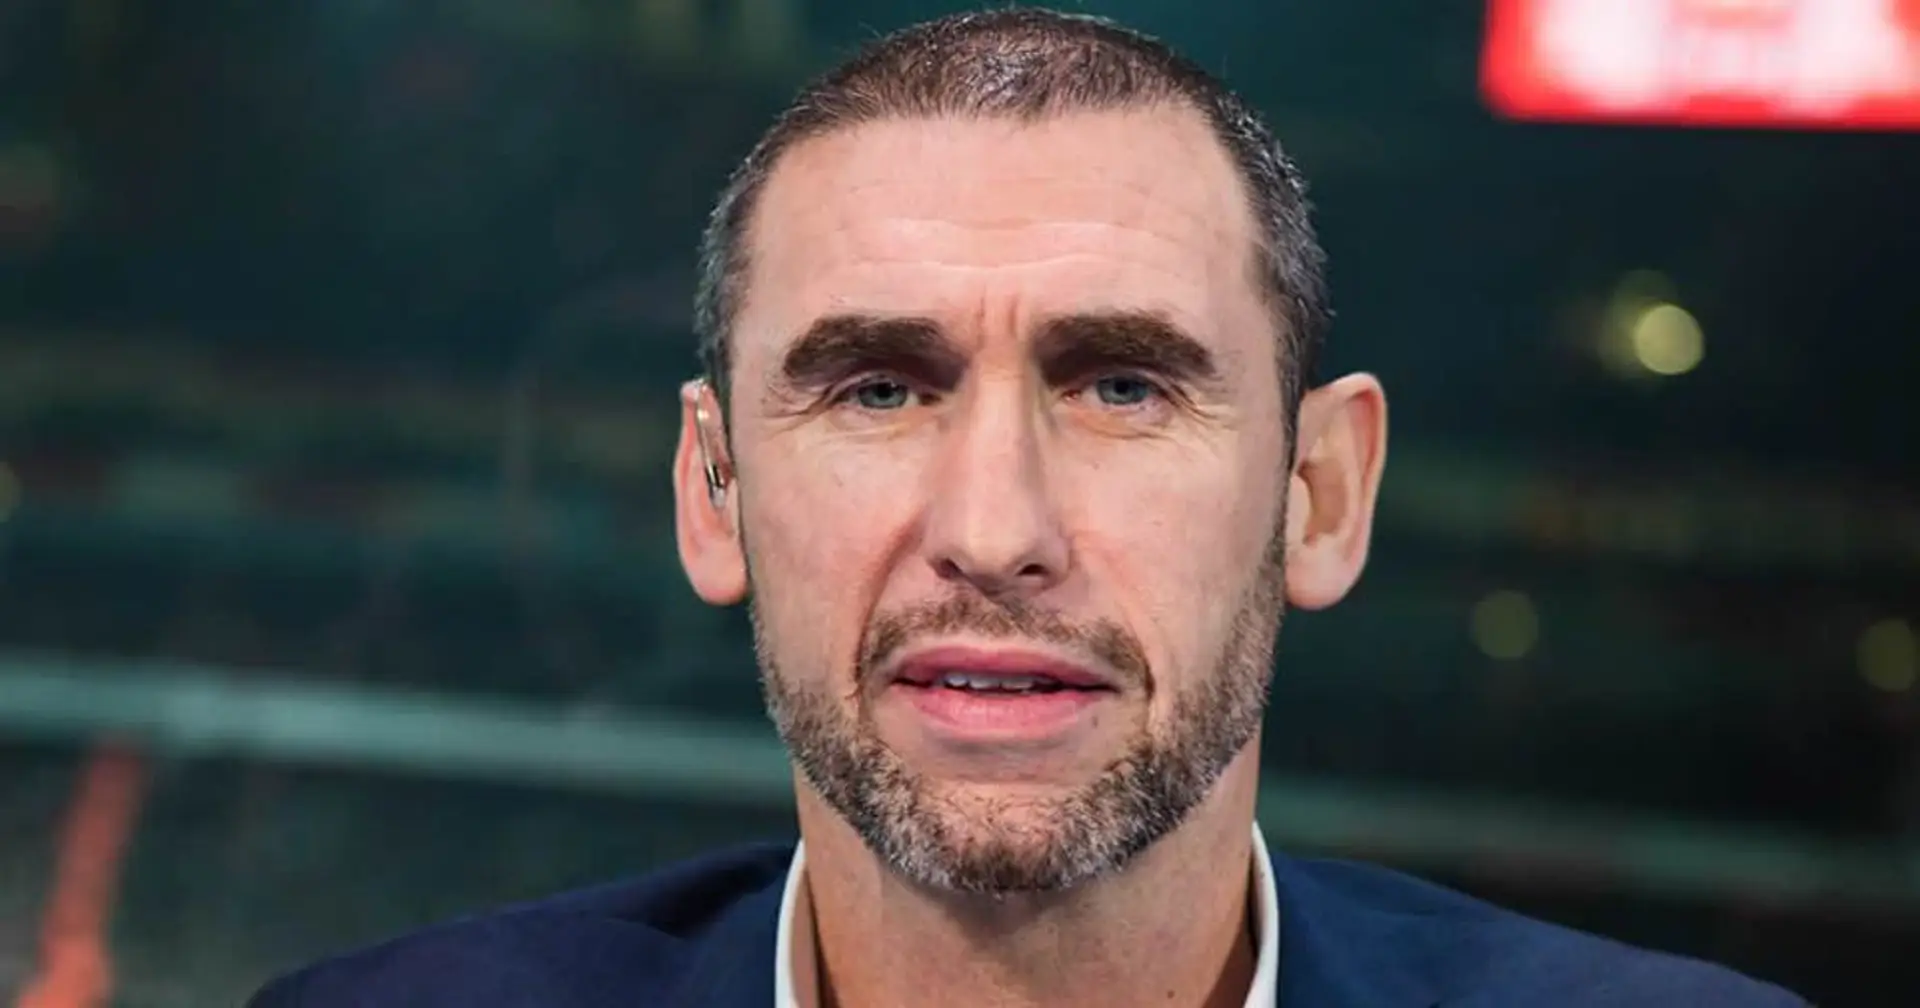 'Wilder’s side enjoy being the underdogs': ex-Gunner Martin Keown names Sheffield players who'll be particular threat to Chelsea